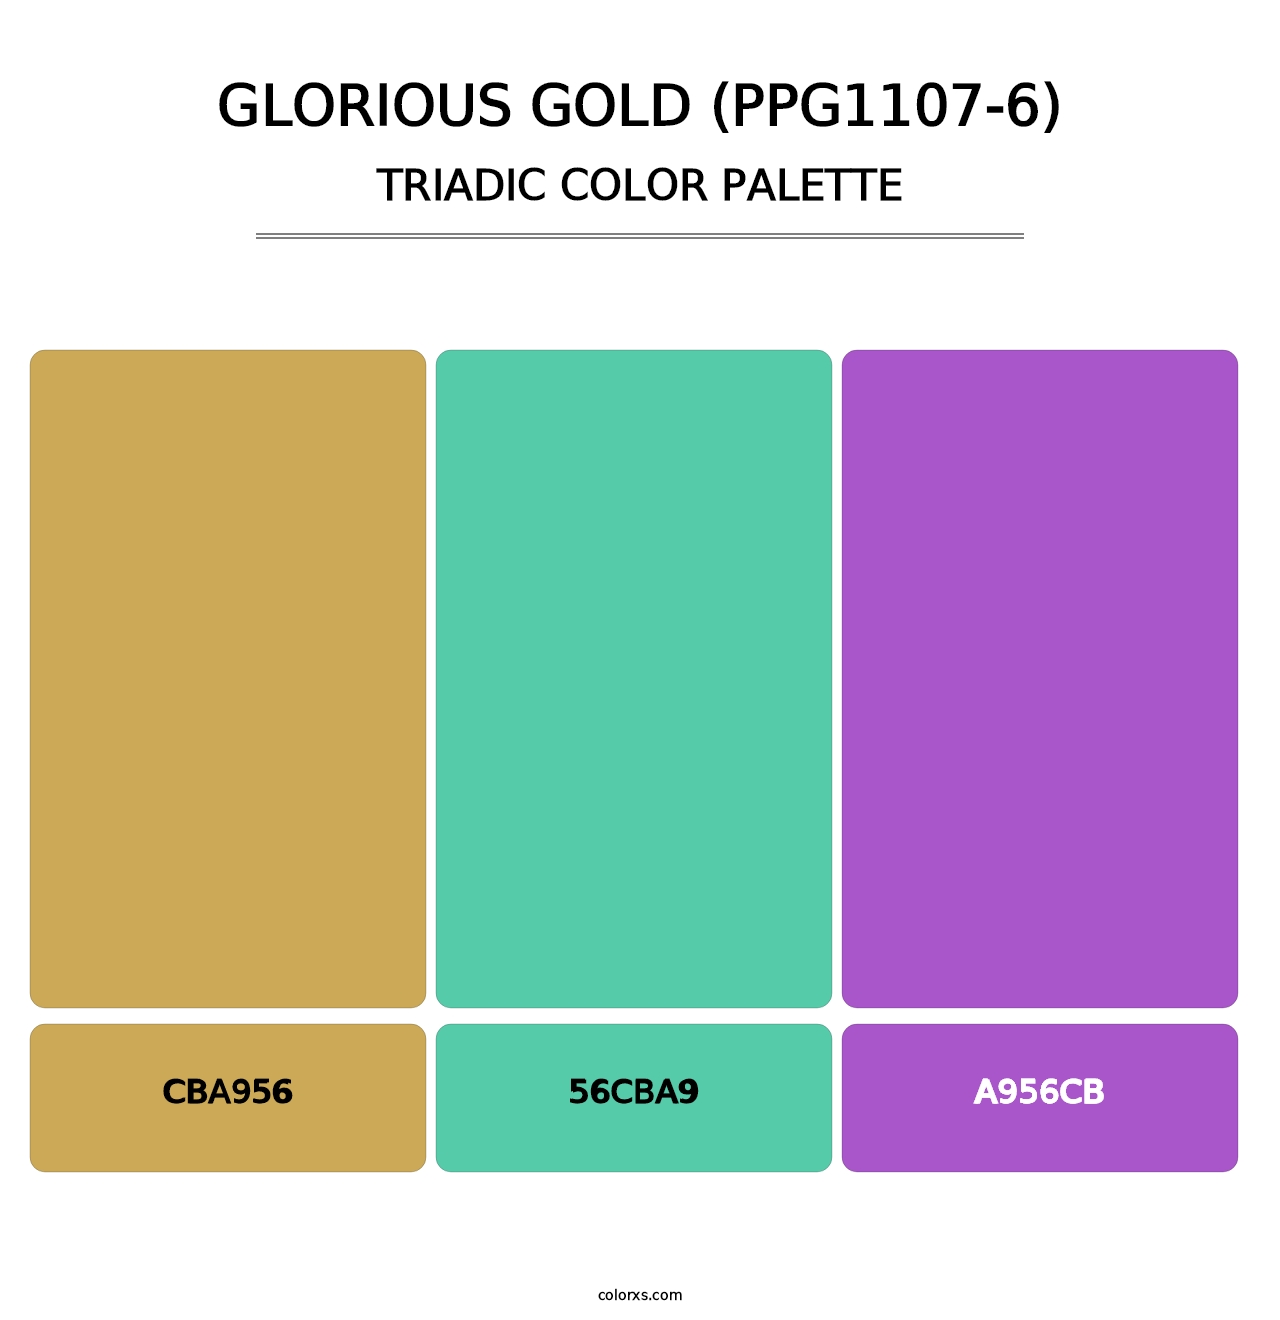 Glorious Gold (PPG1107-6) - Triadic Color Palette